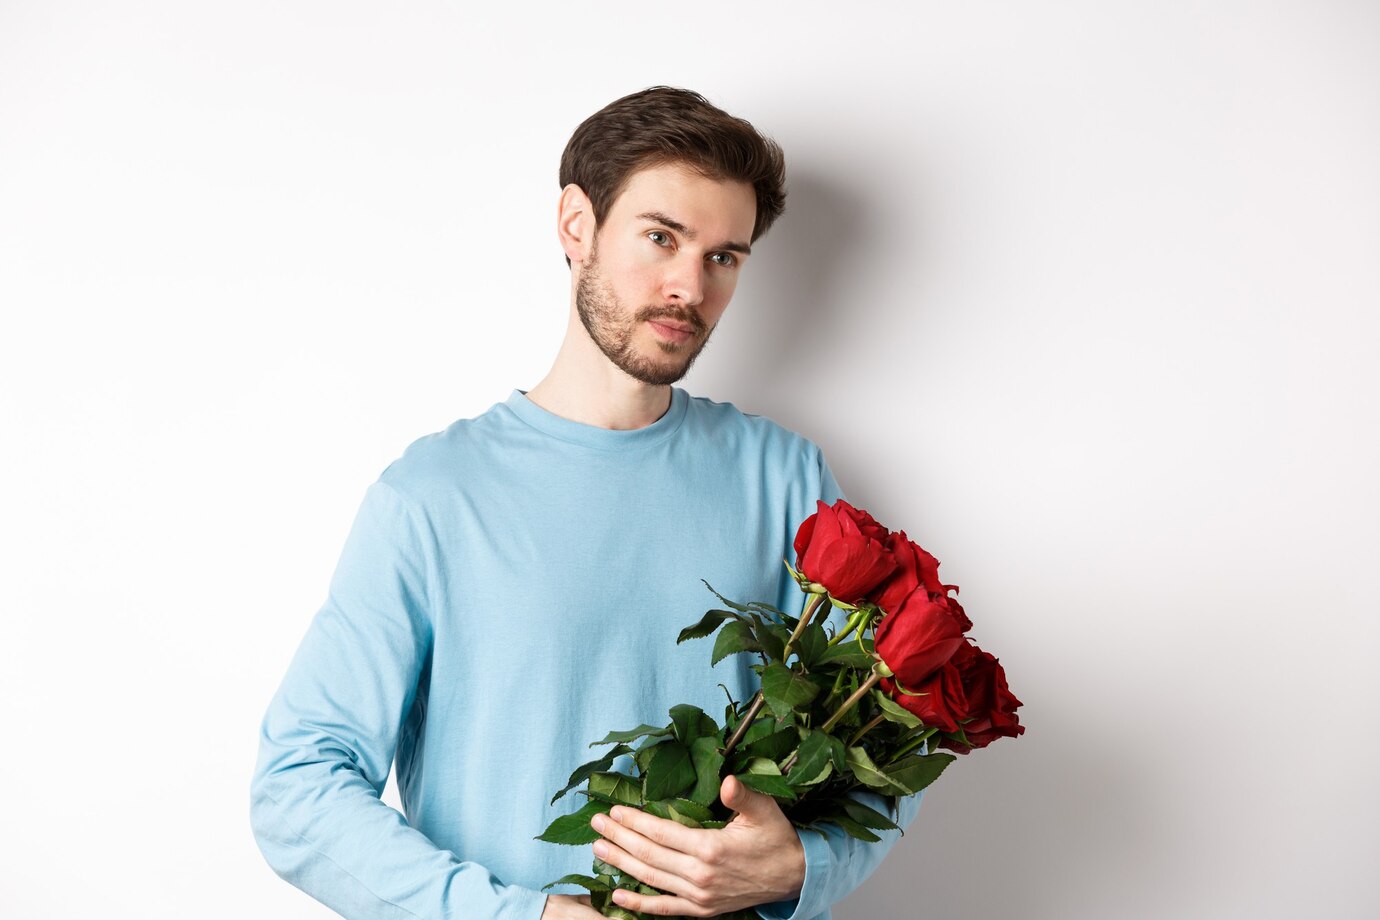 A man holding a bouquet of roses | Source: FreePik